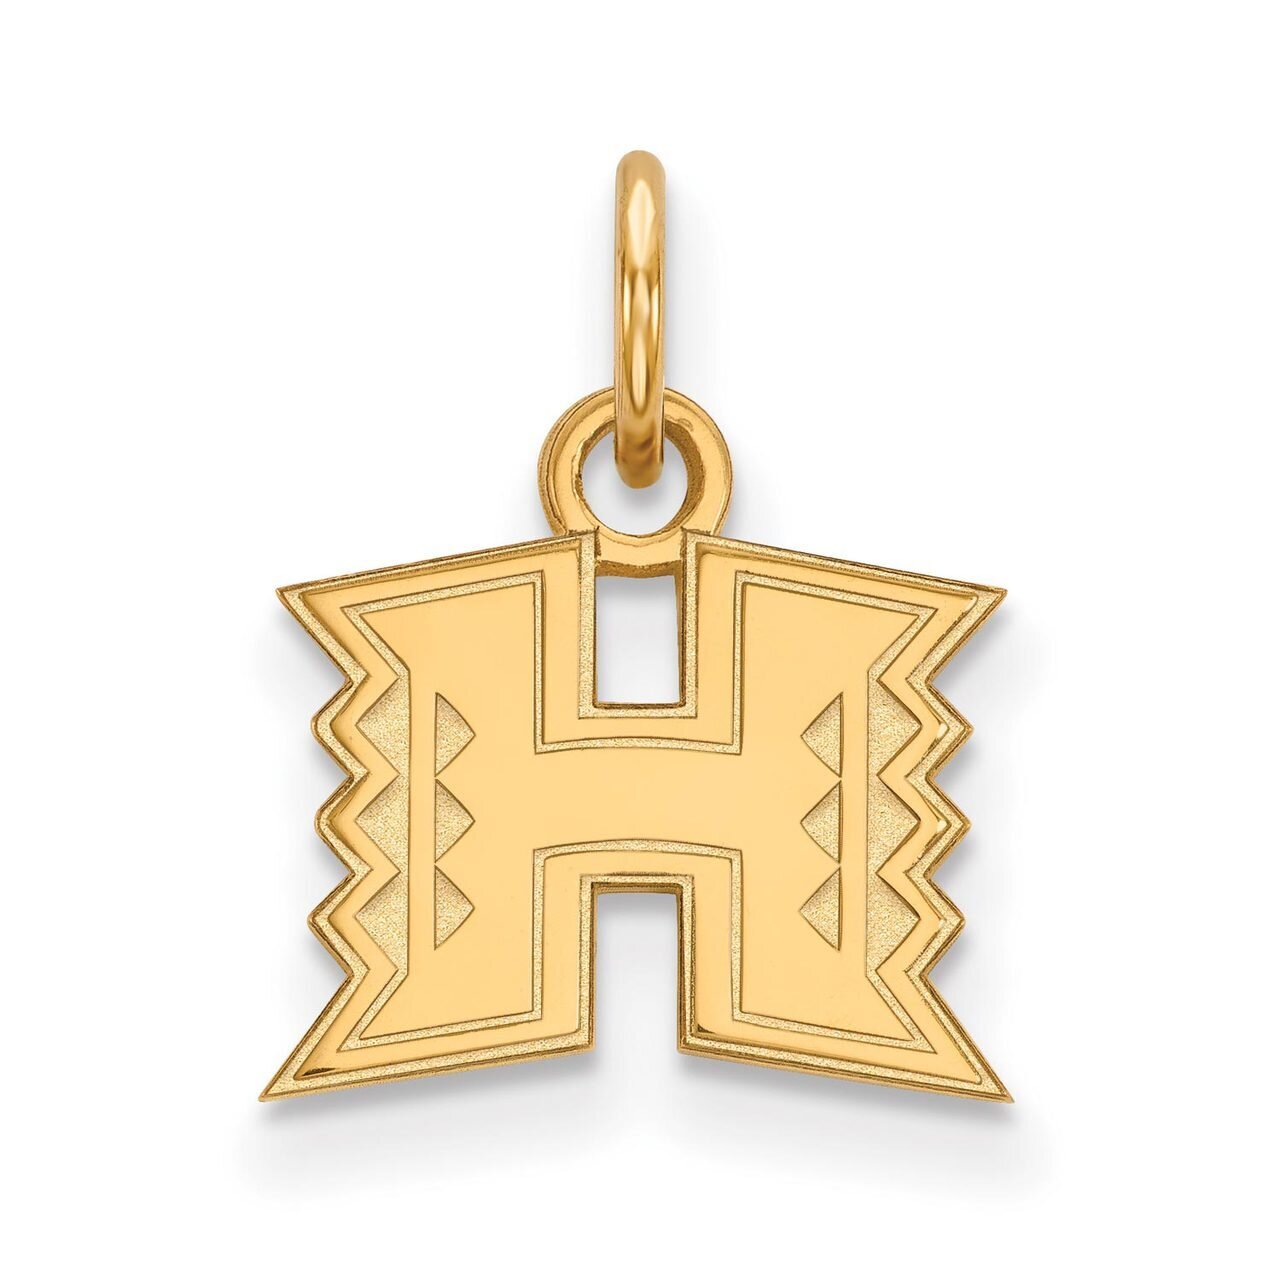 The University of Hawaii x-Small Pendant Gold-plated Silver GP001UHI